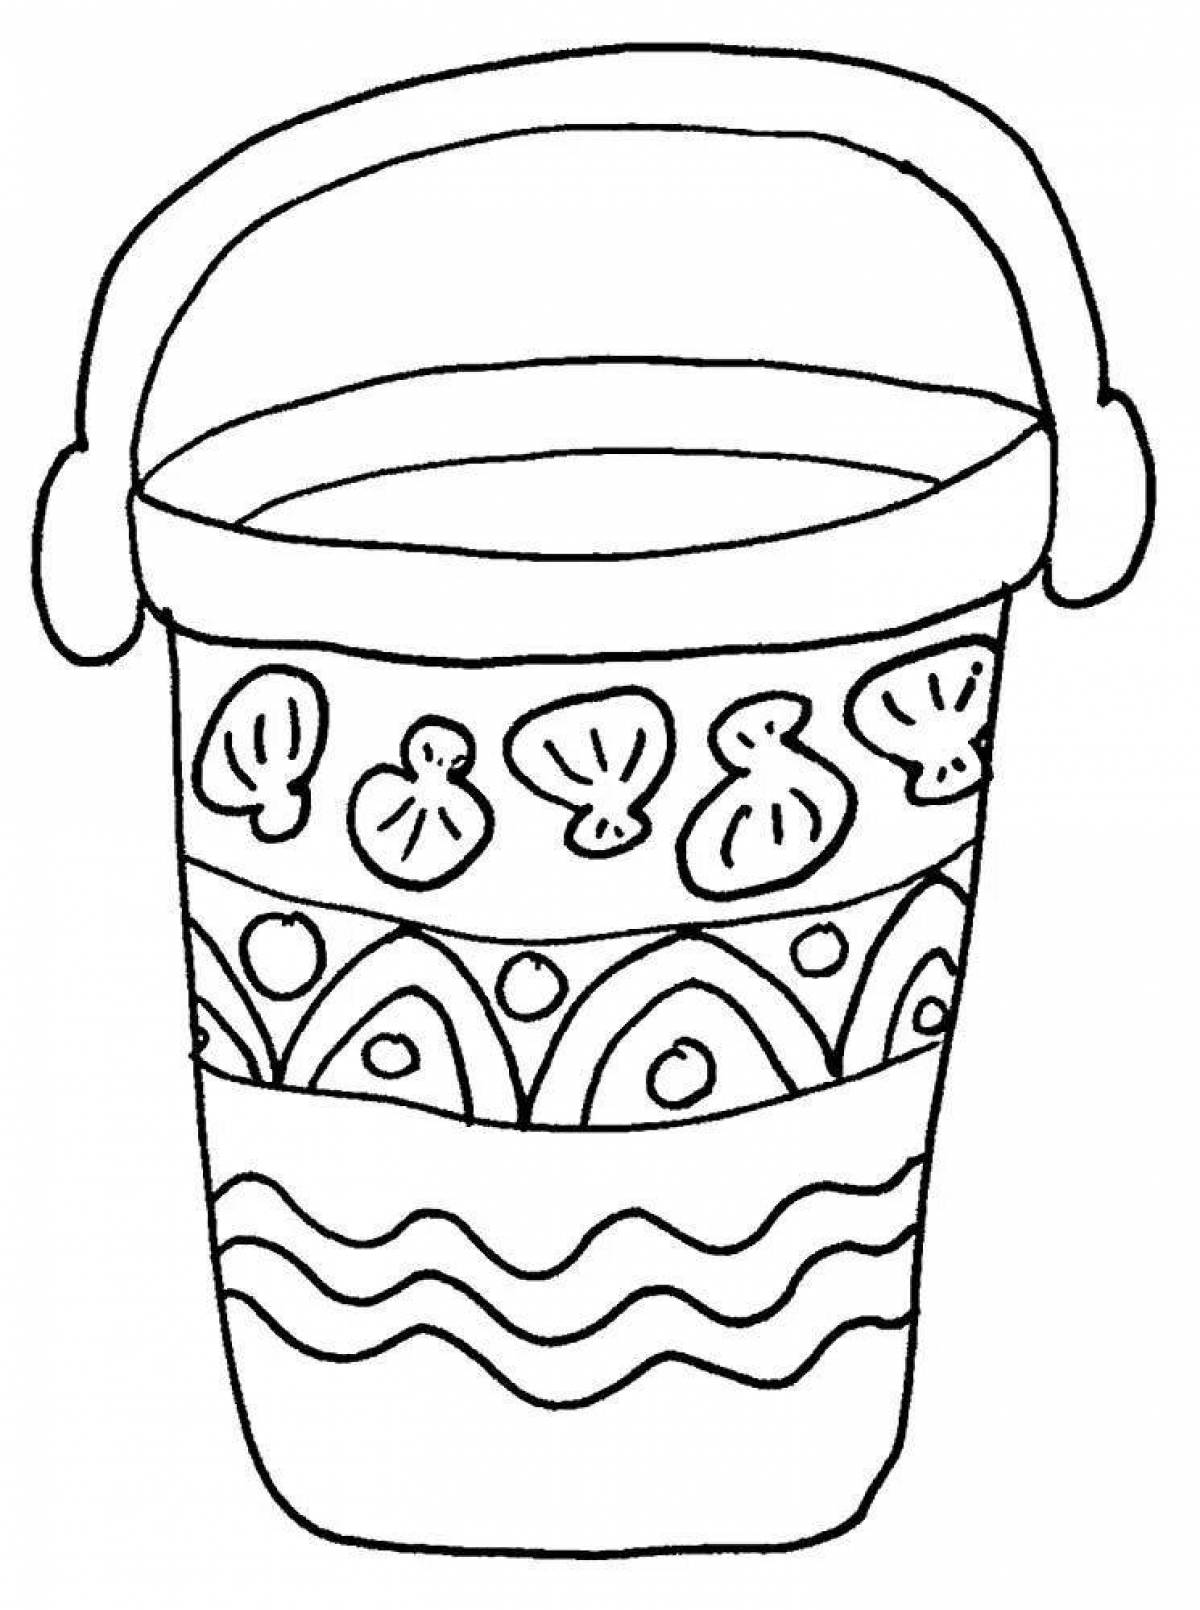 Gorgeous bucket coloring page